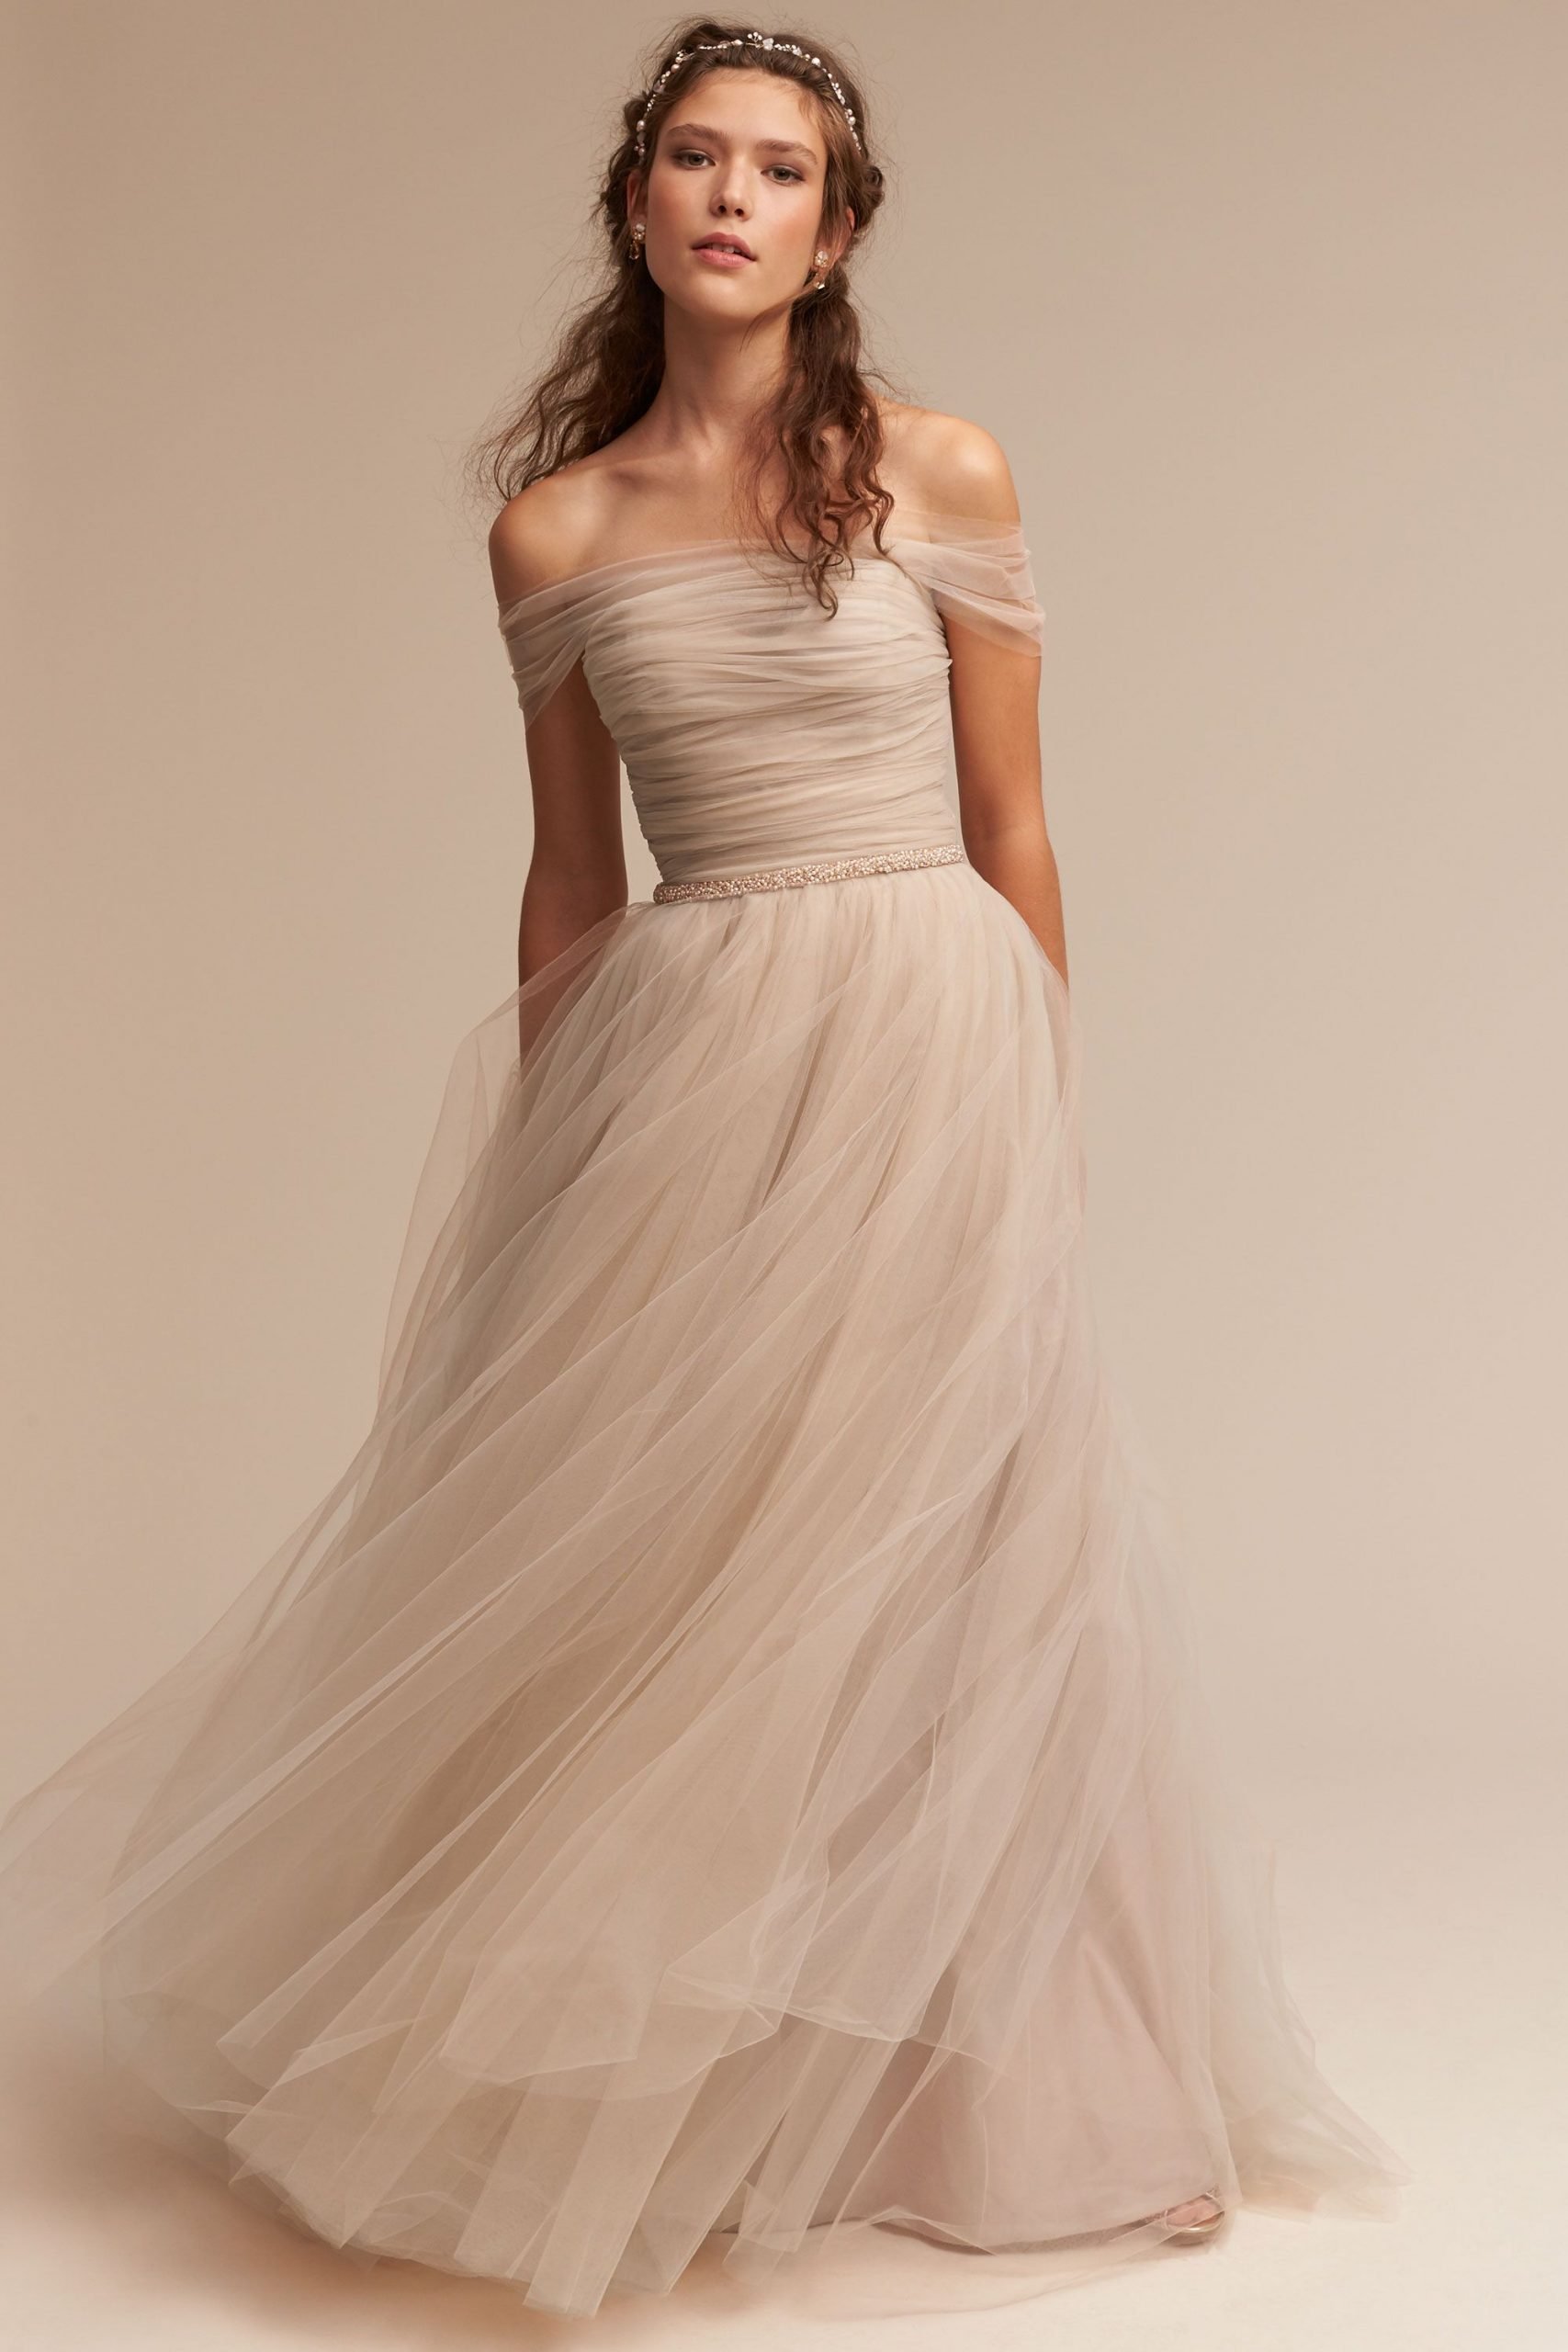 Where to Buy BHLDN Wedding Dresses in Store / Online ...